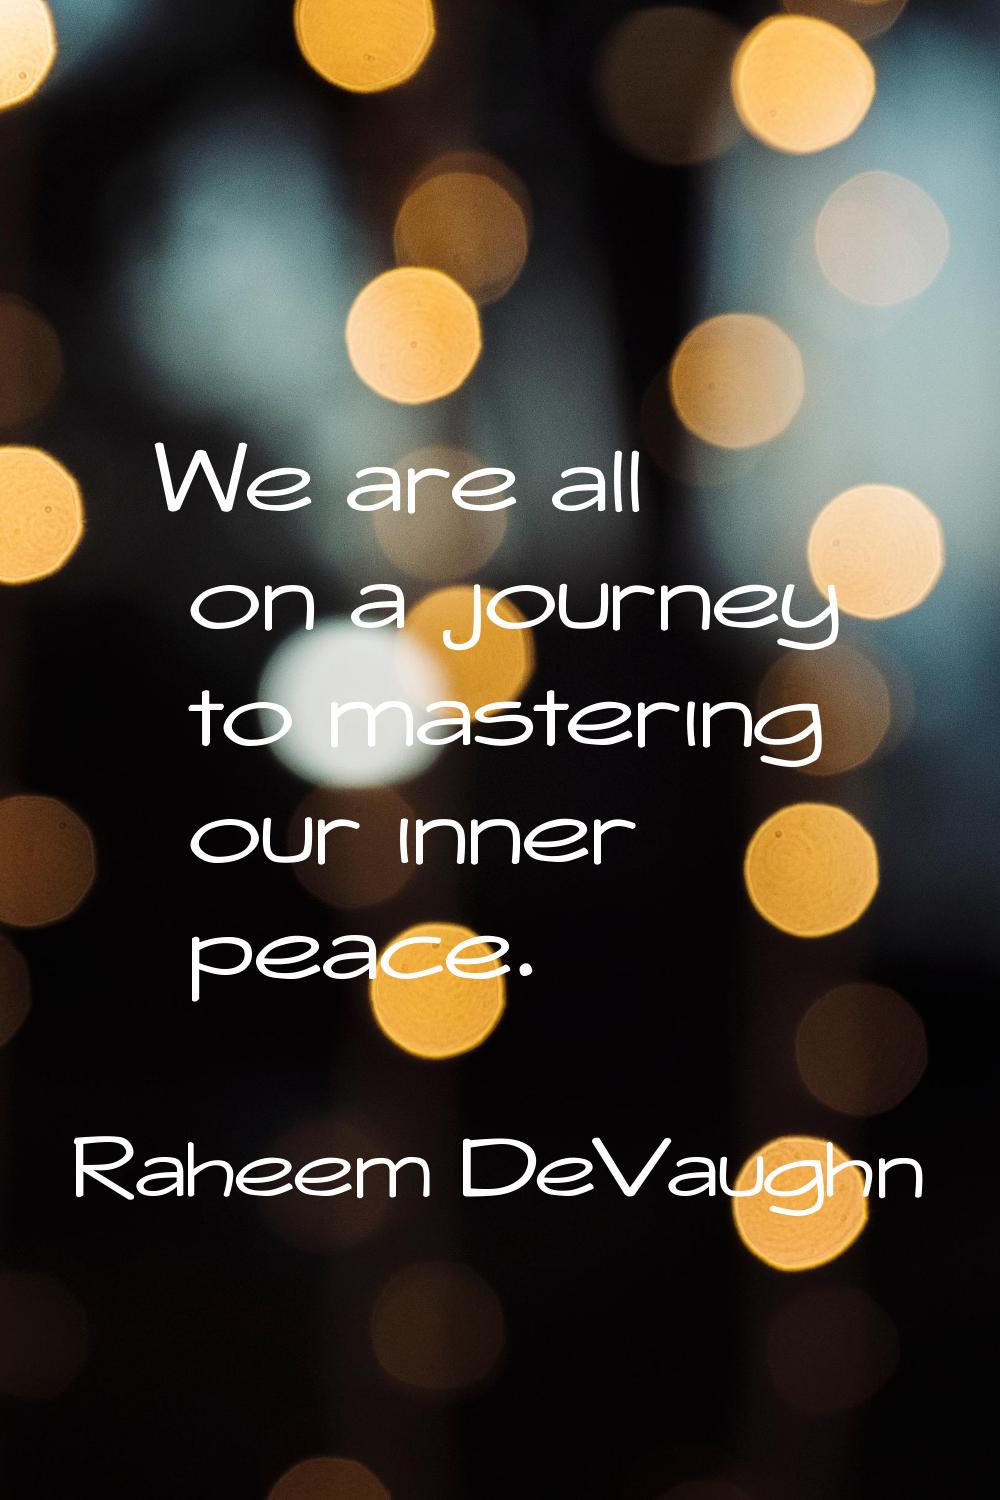 We are all on a journey to mastering our inner peace.